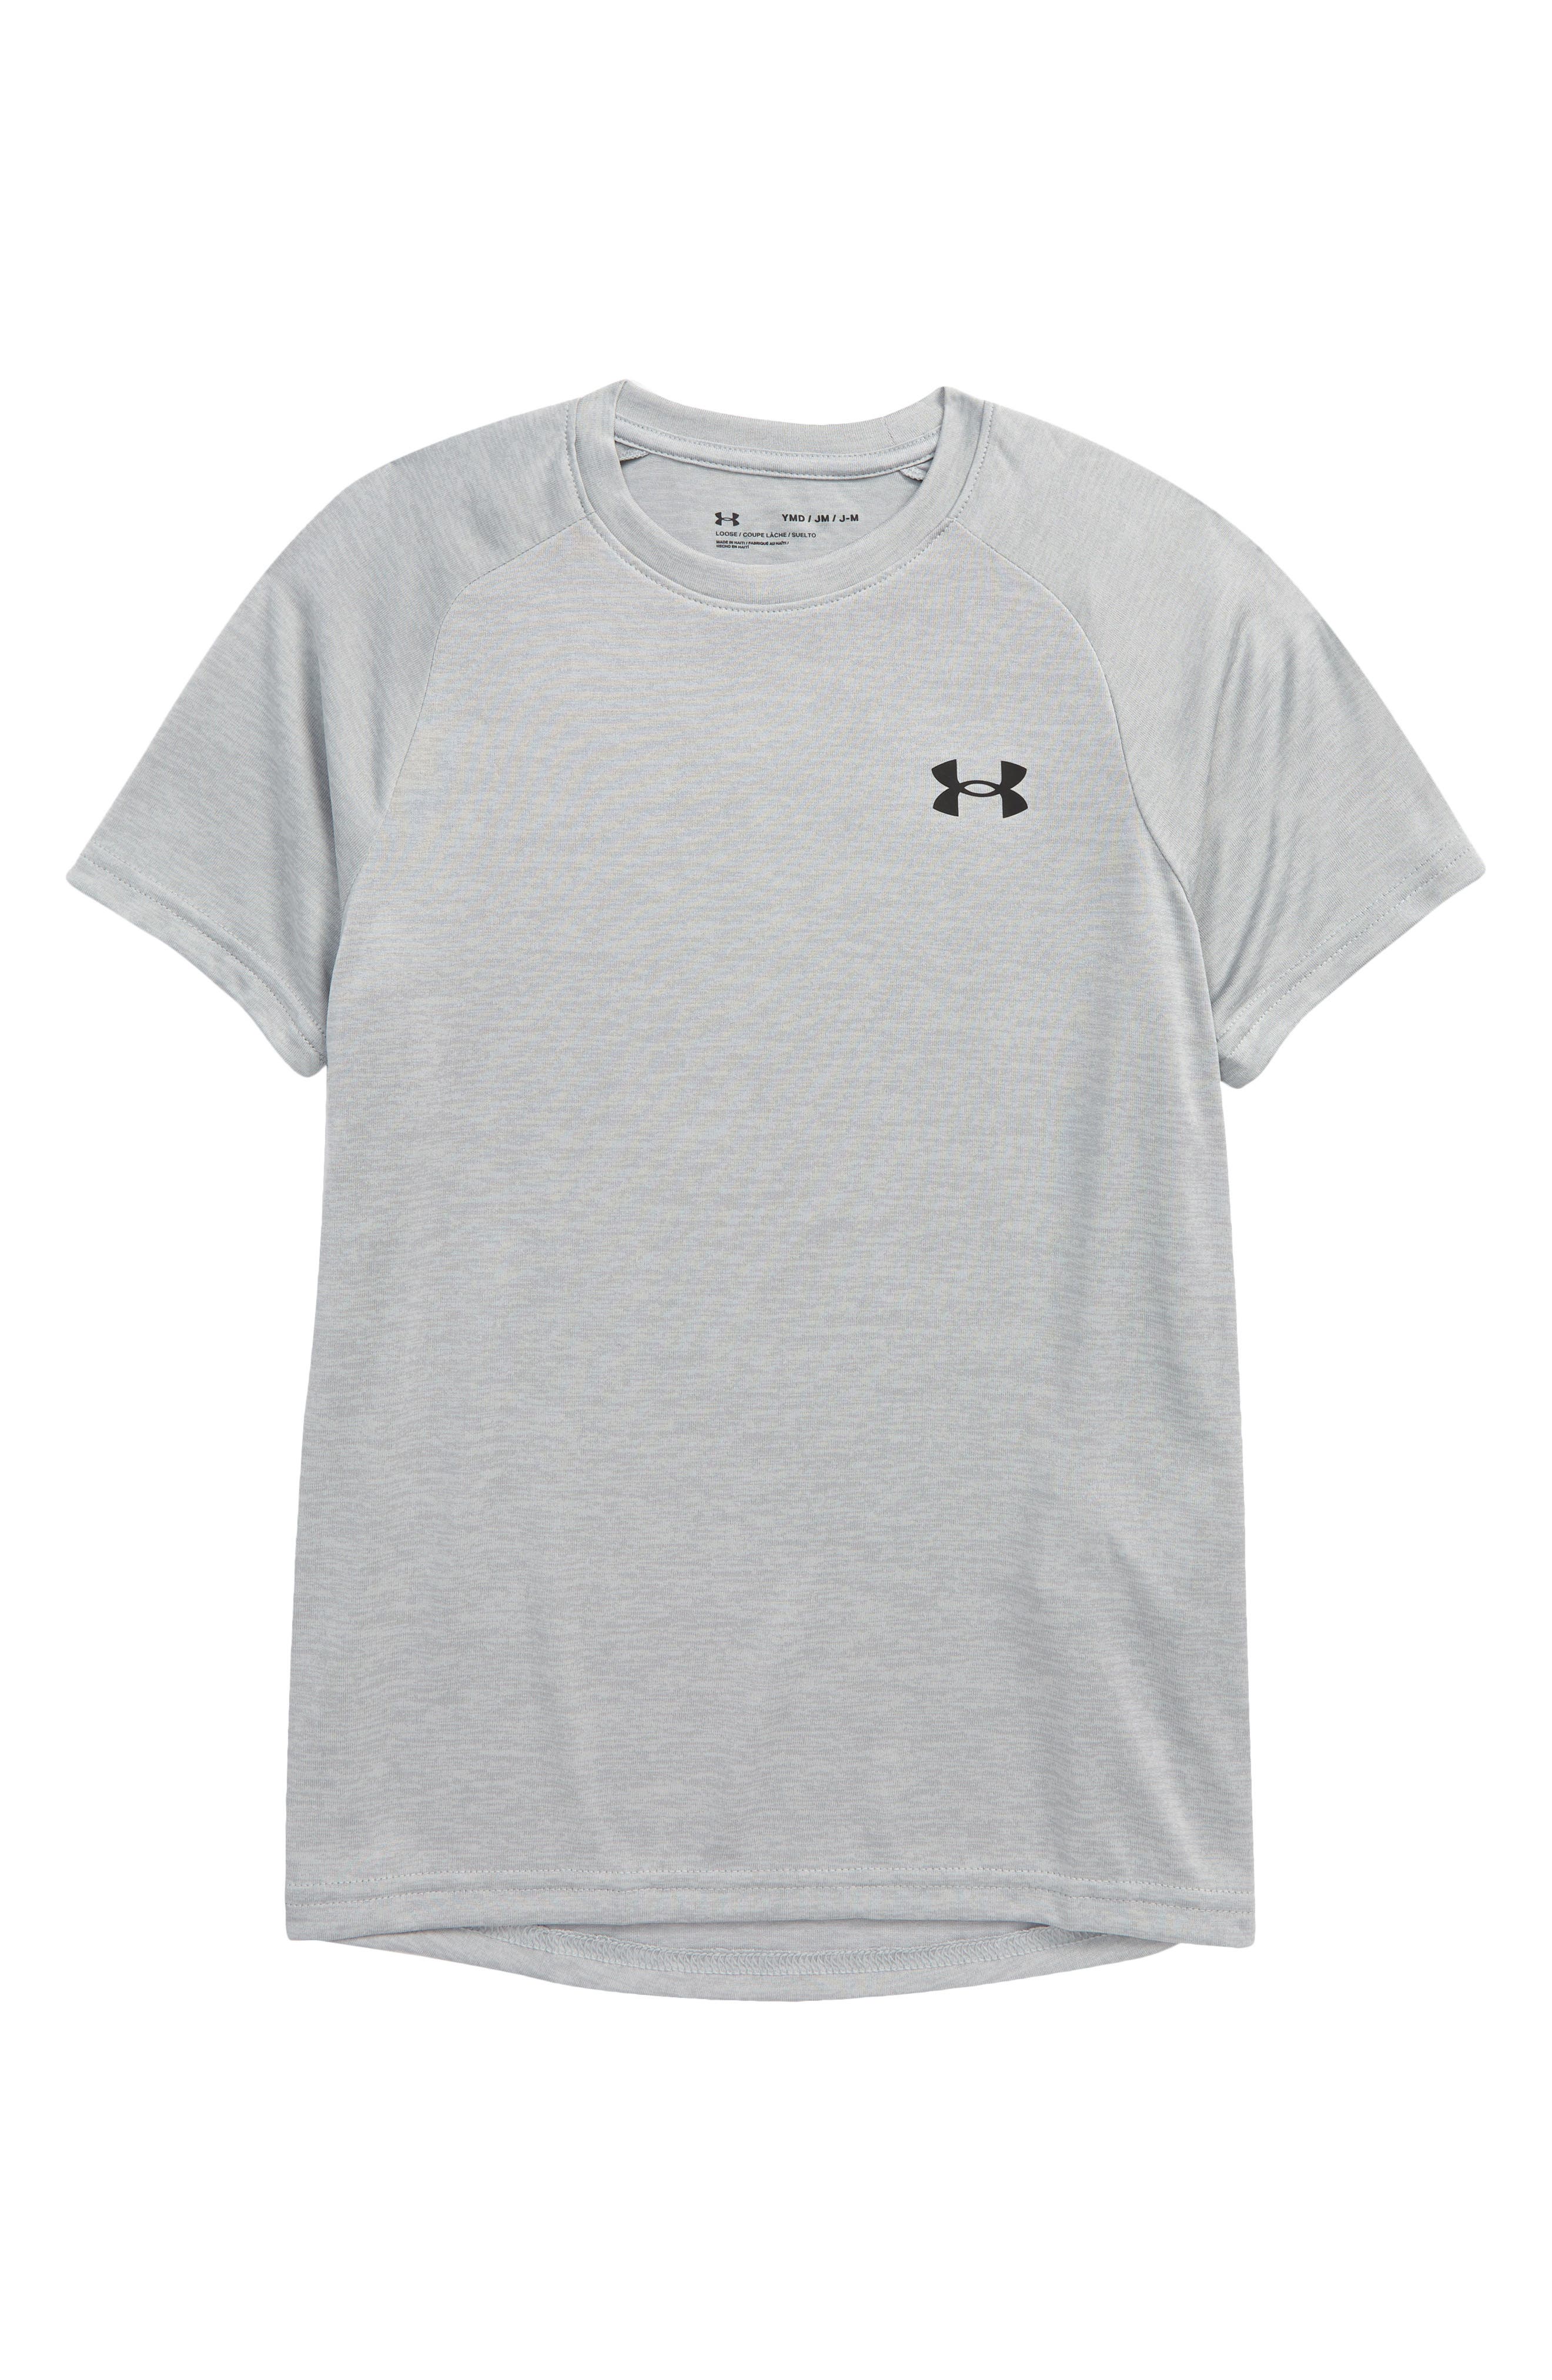 Under Armour Heatgear Youth Serious Speed Graphic T-Shirt Big Boys.